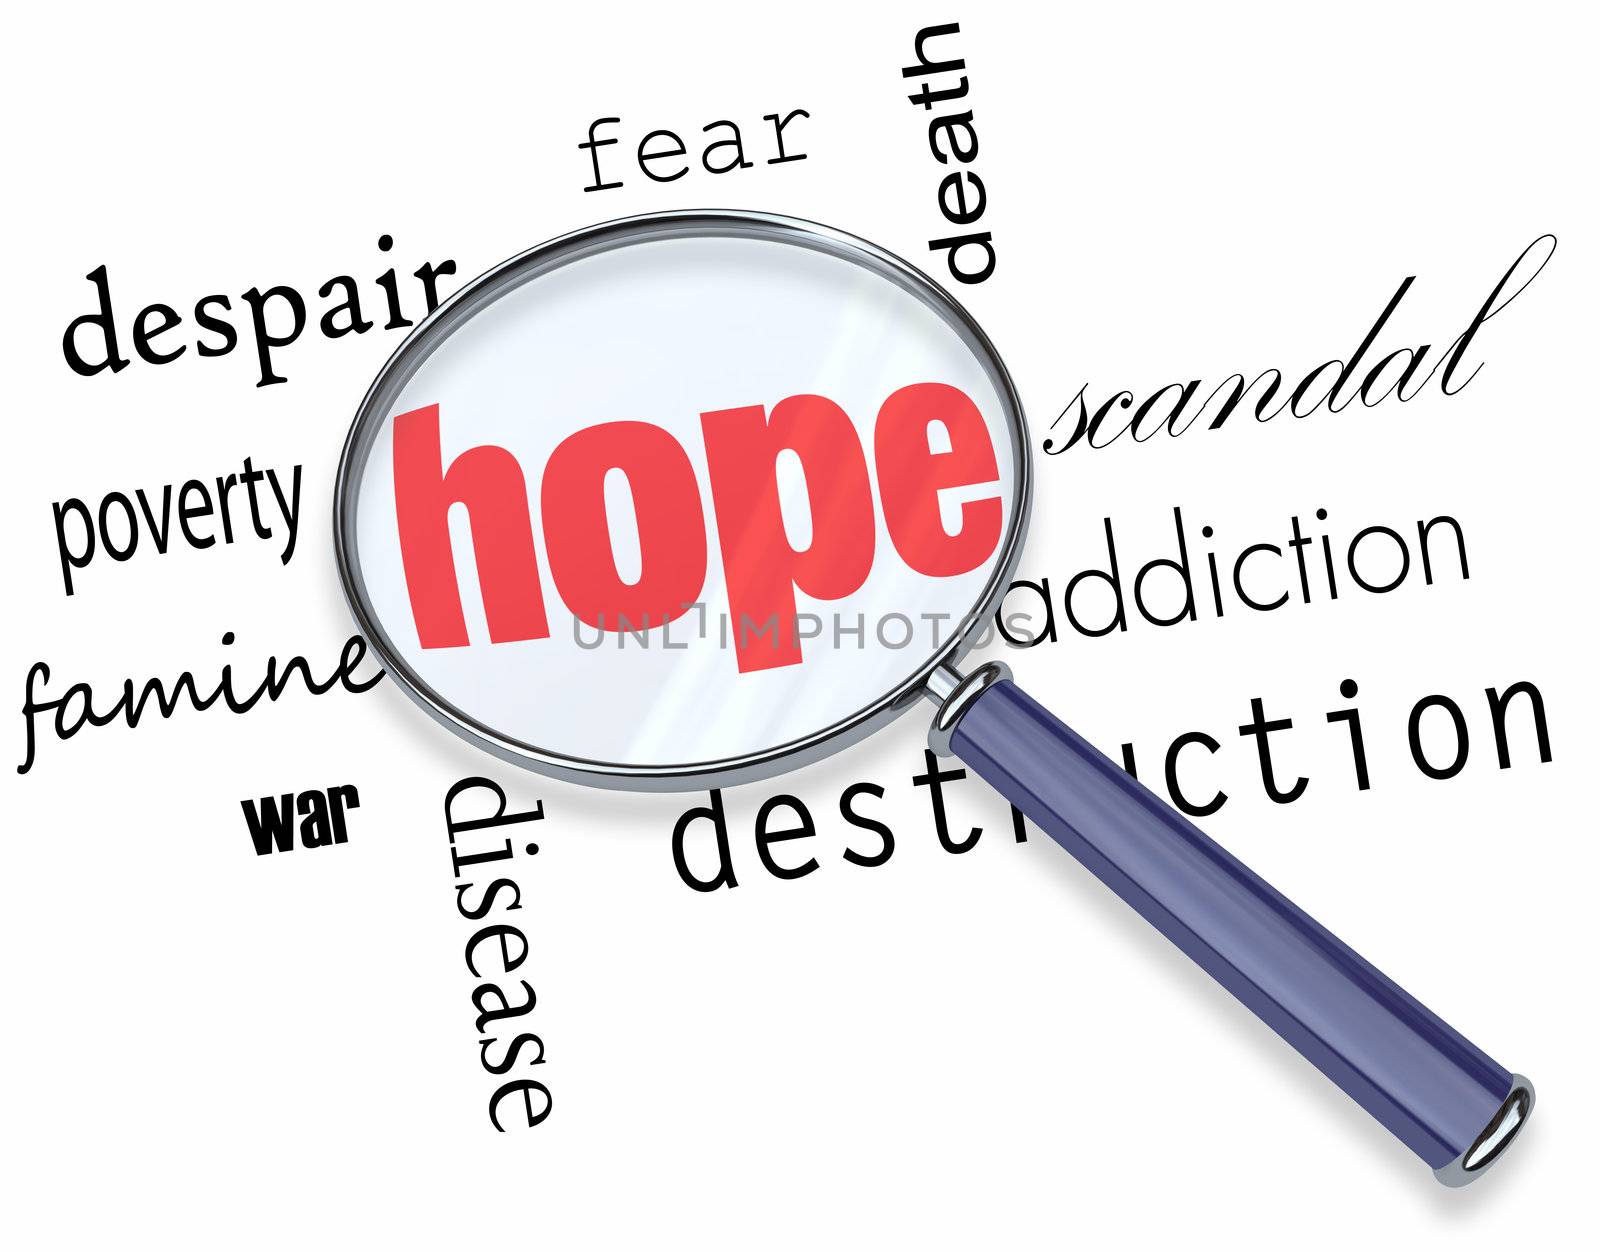 Searching for Hope in Bad News - Magnifying Glass by iQoncept